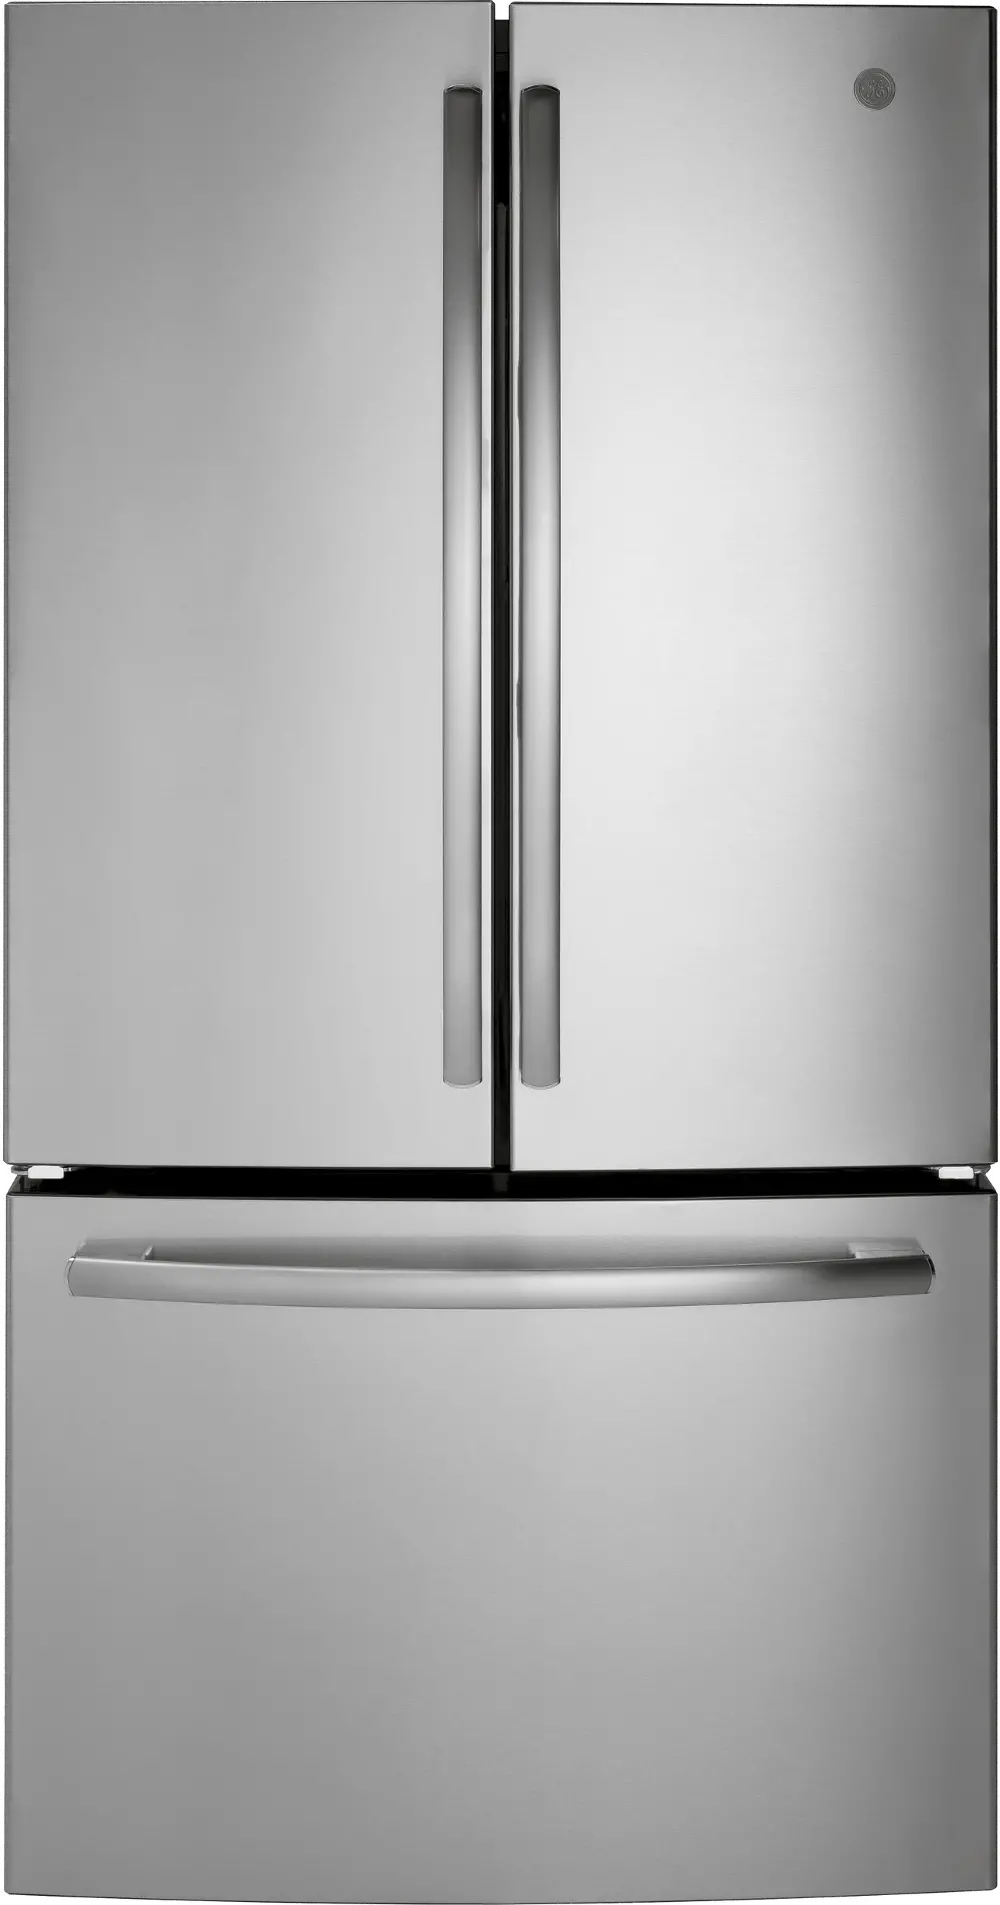 GNE27JSMSS GE 27 cu. ft. French Door Refrigerator - 36 Inch Stainless Steel-1